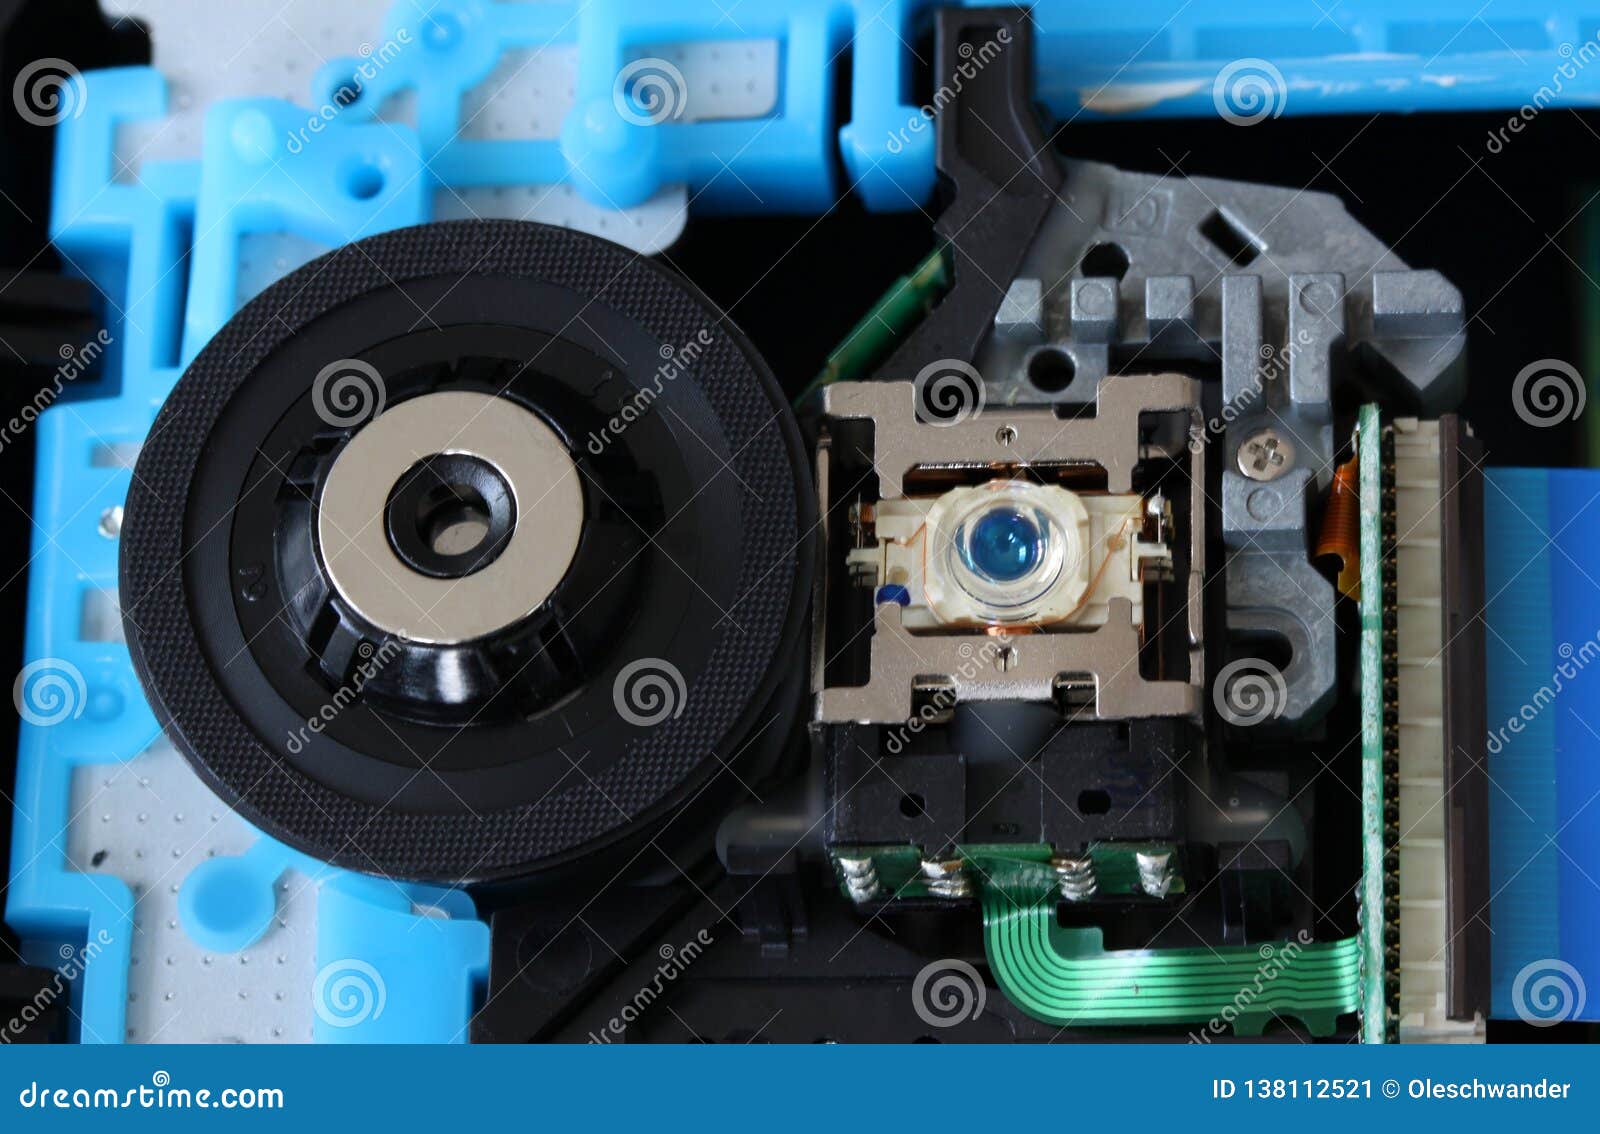 cd inside a dvd payer showing optical pick up laser lens with circuits, cables and boards - close up